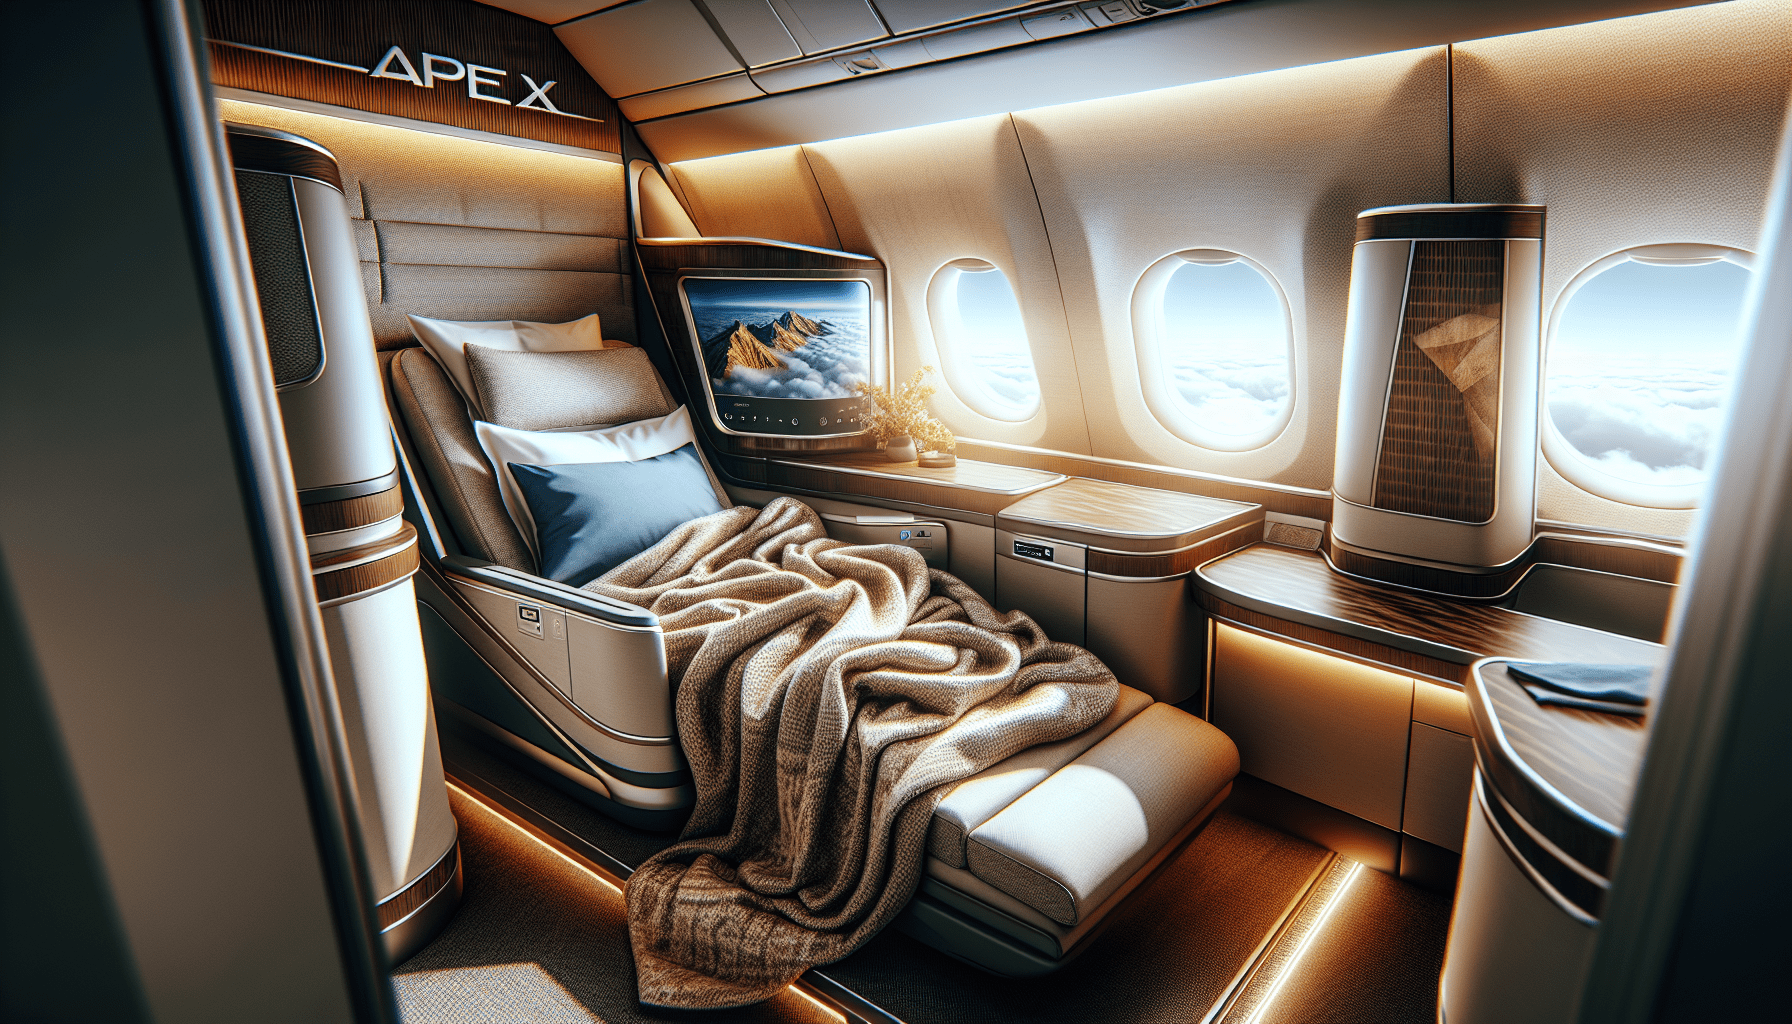 Flying in Comfort: Noel’s Experience with Korean Air’s Apex Suites in Business Class